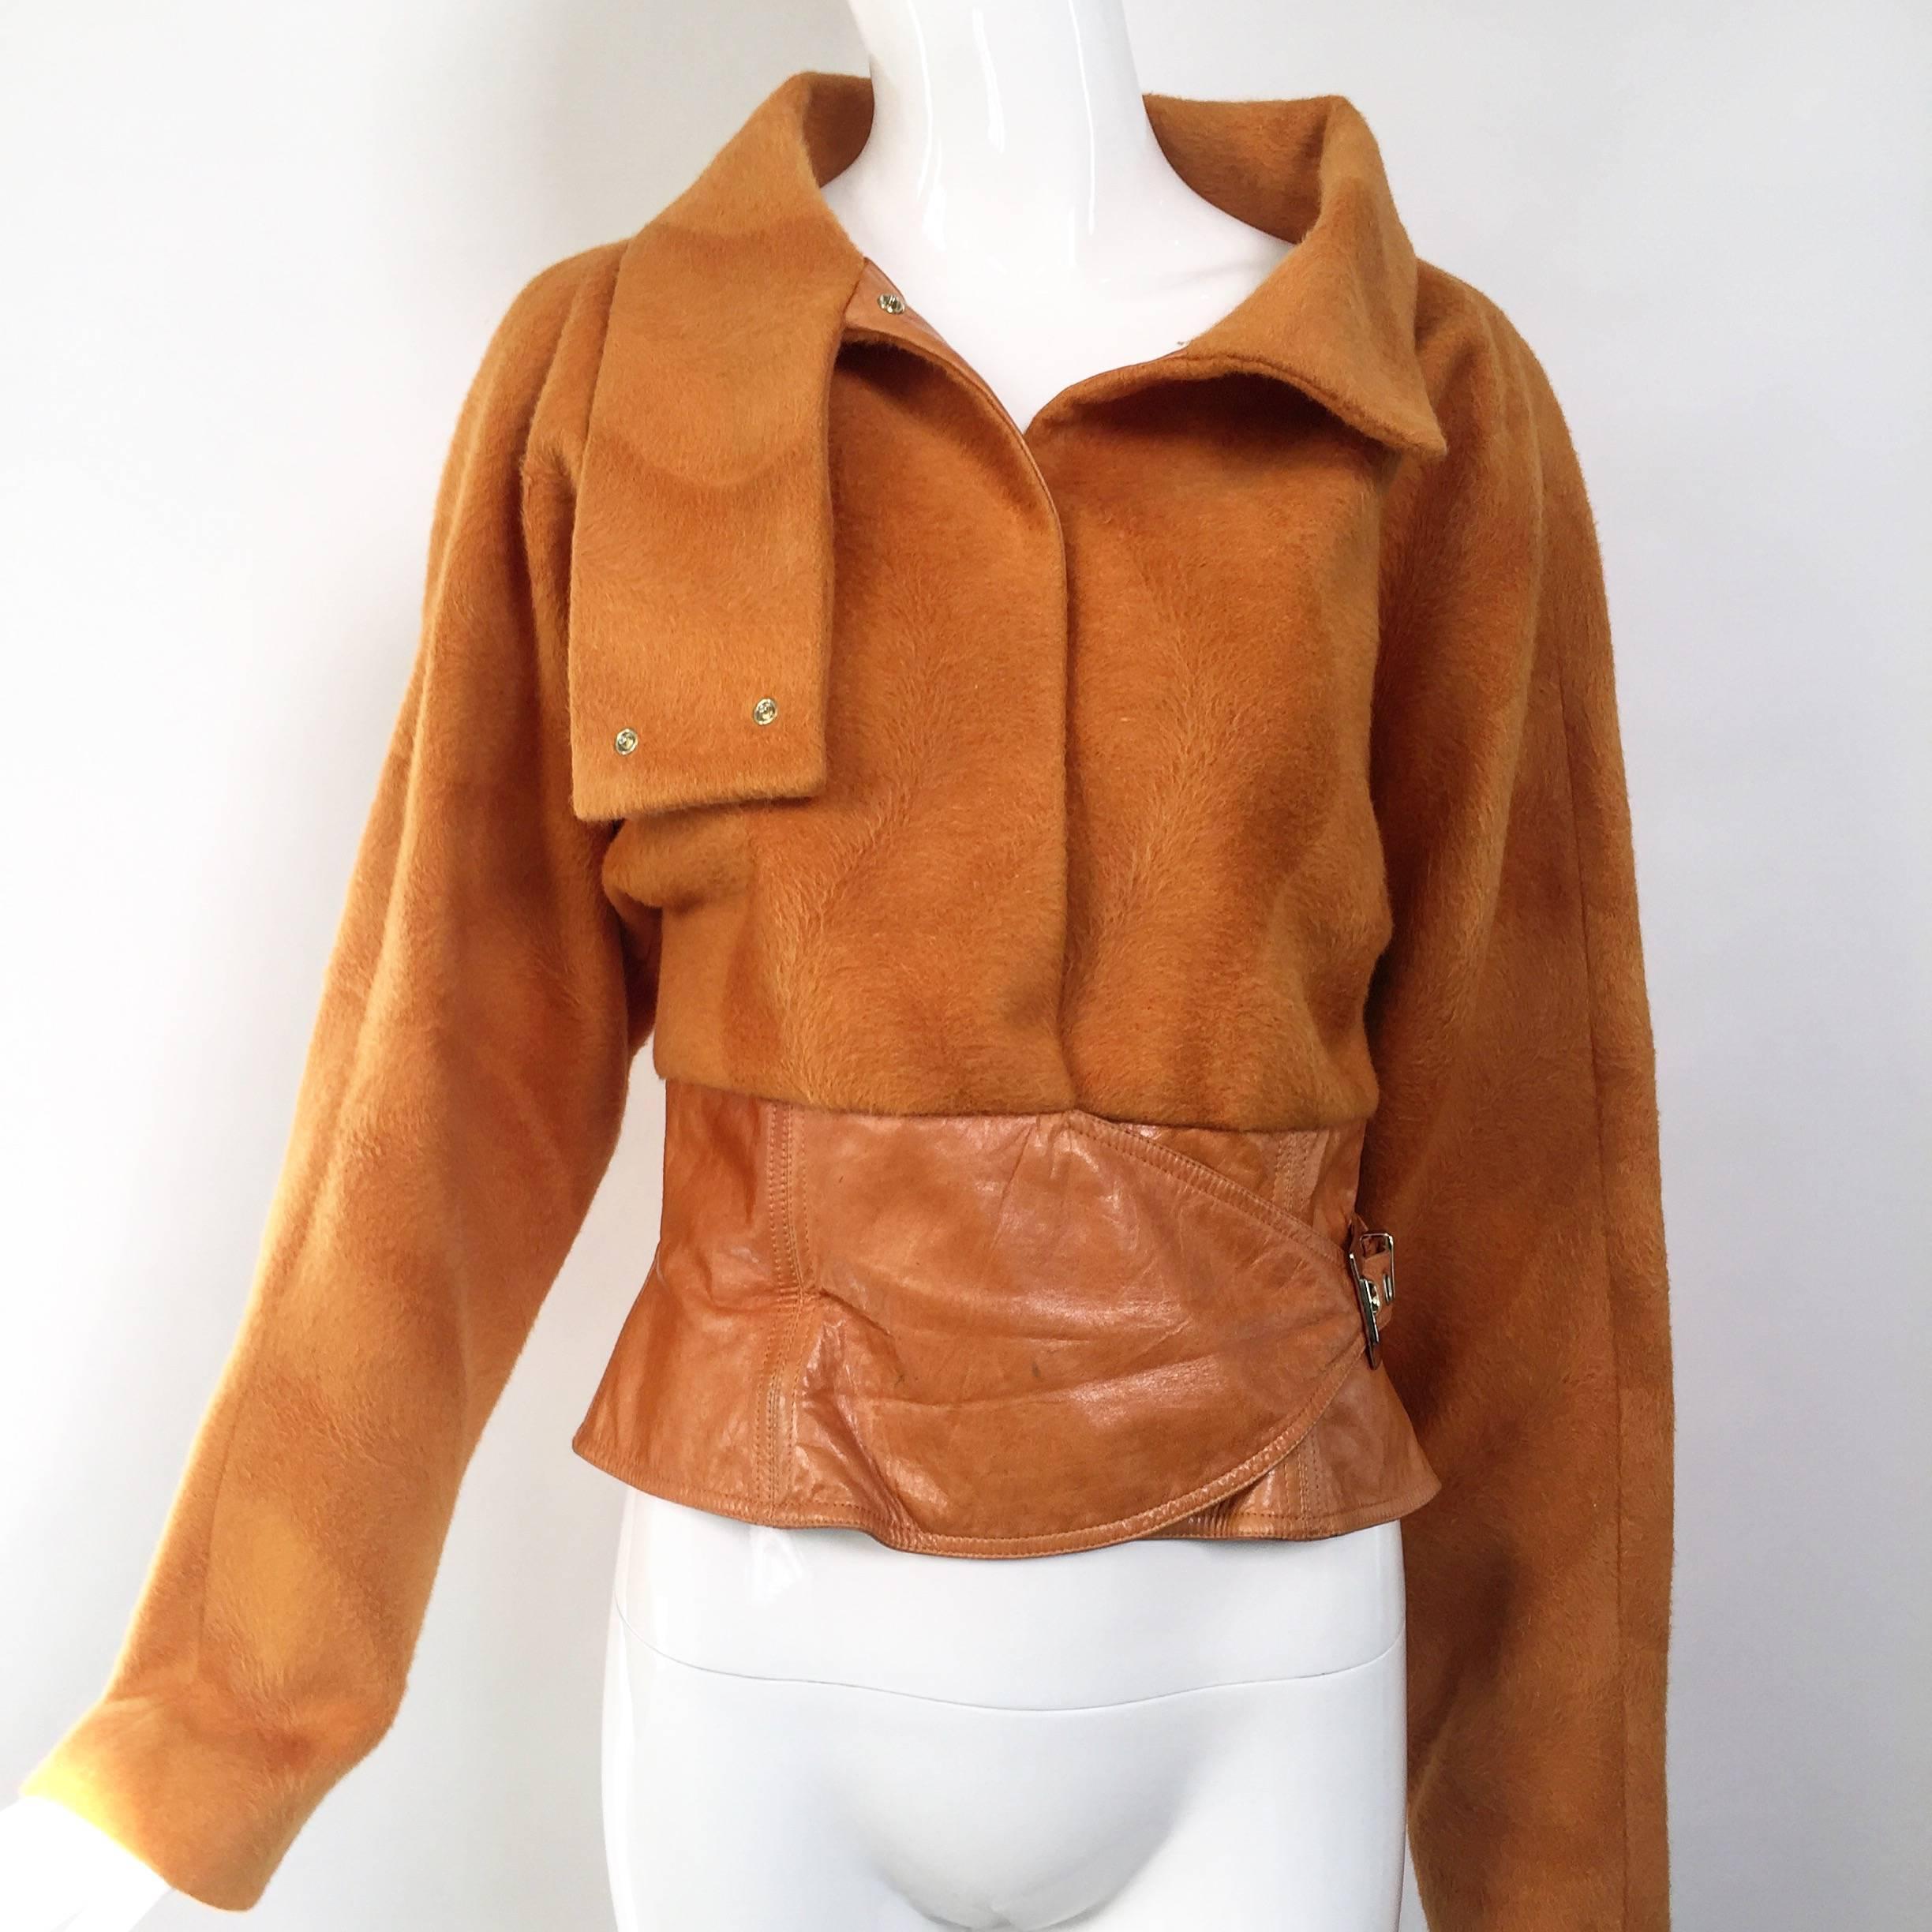 Gianni Versace soft cashmere-leather jacket. Beautiful color.
Marked size 44 but fit size 4-6-8
Bust : 36
Waist : 30.5, the smallest hole on the belt is 26